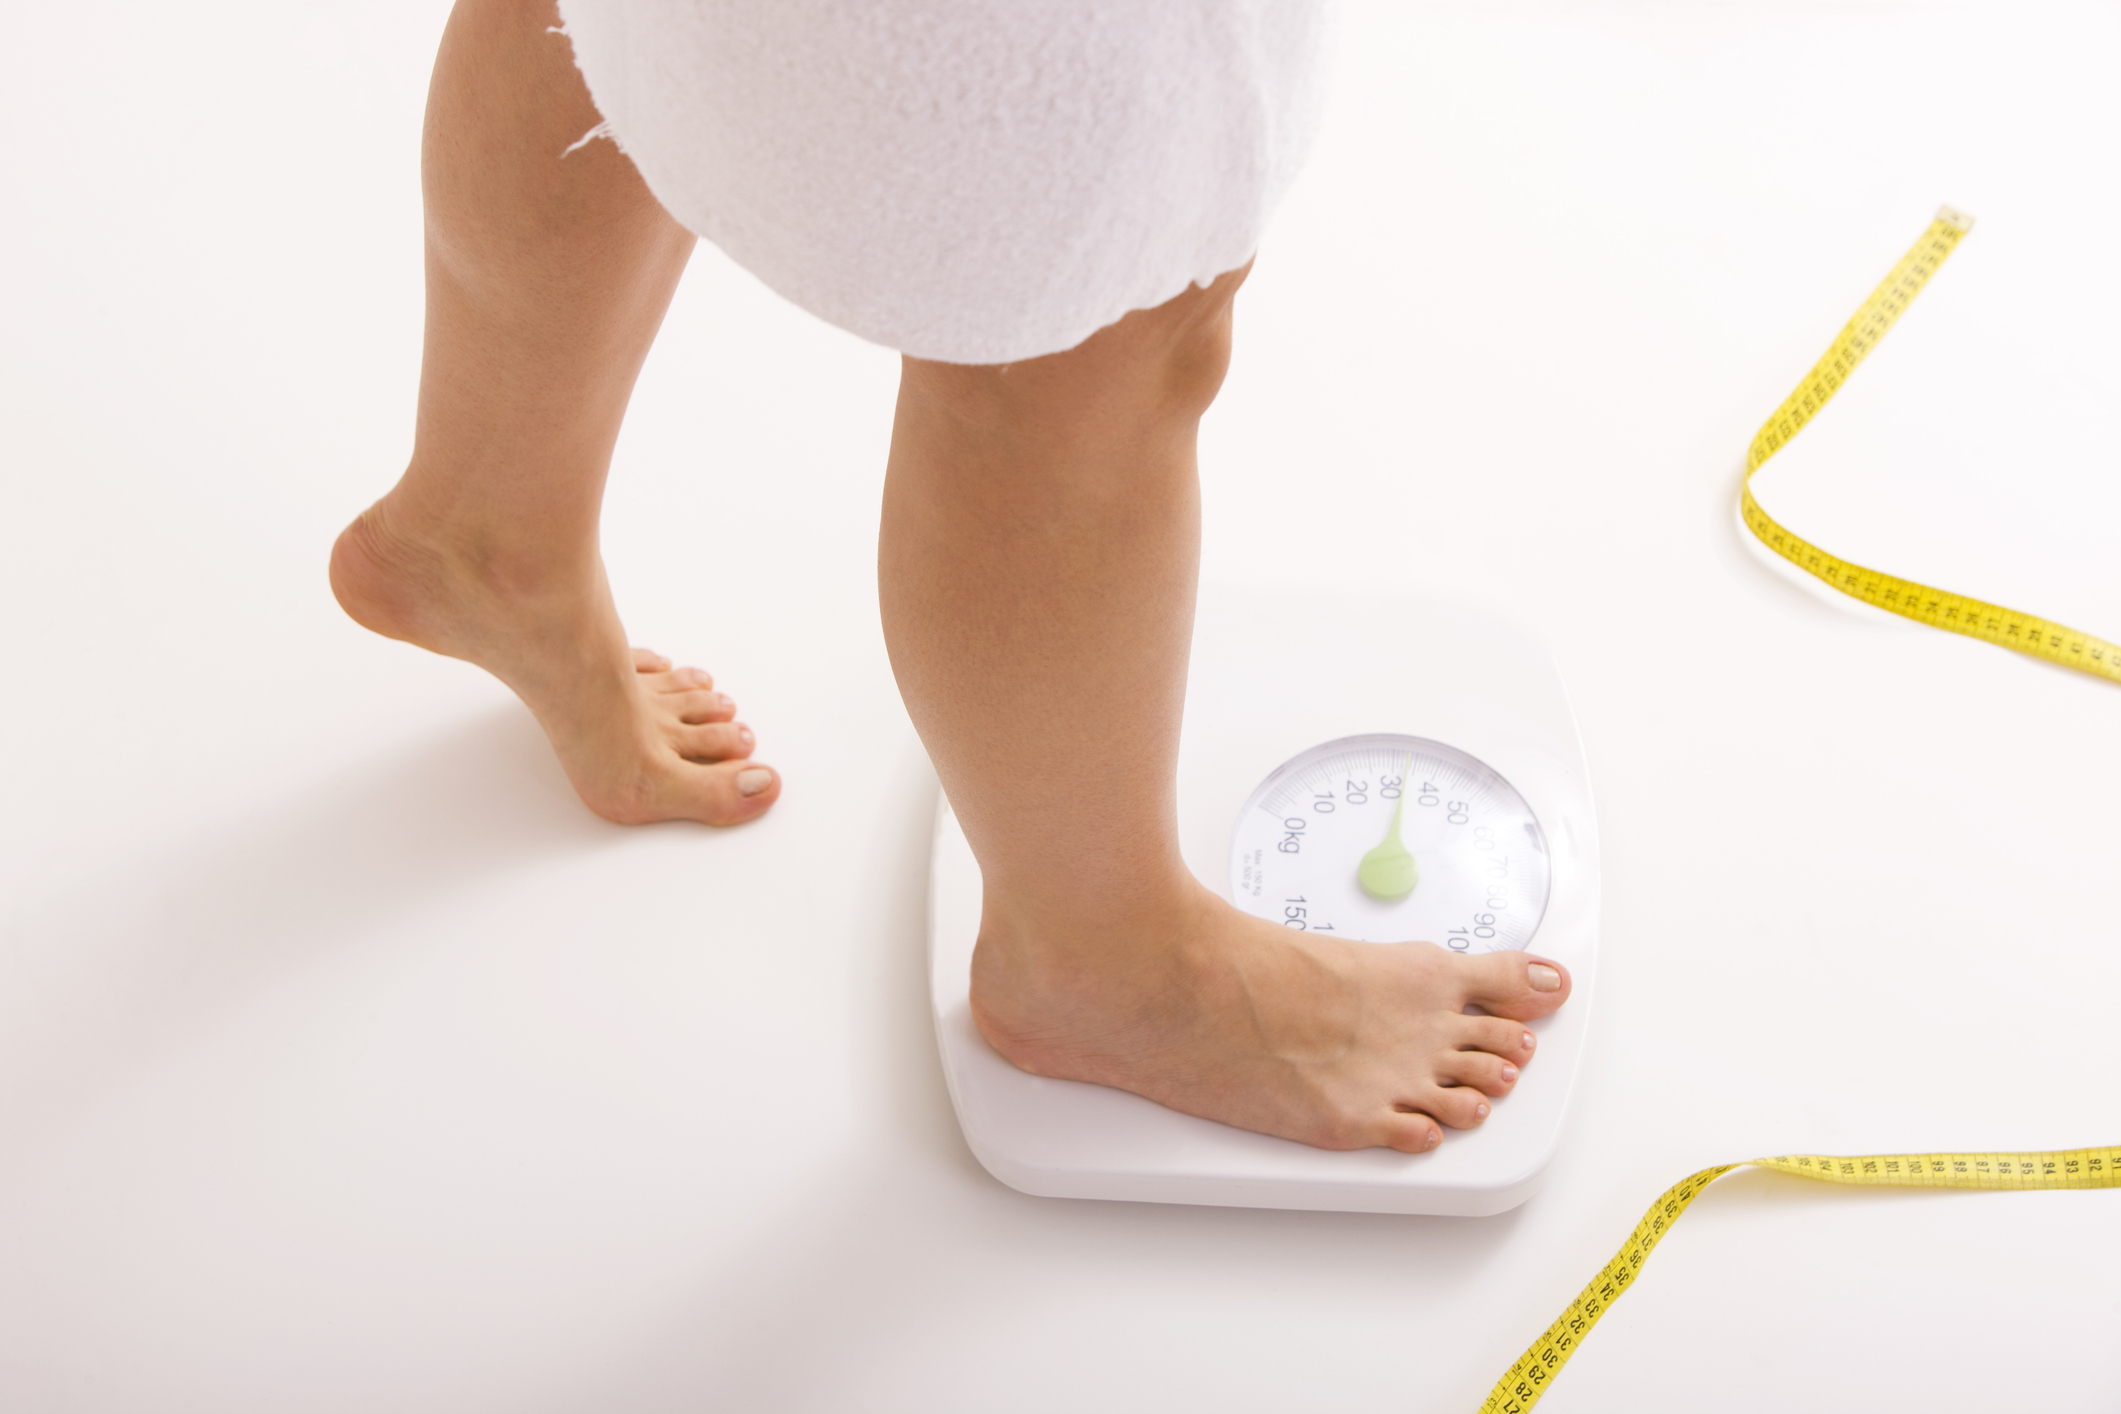 Research proves age is no barrier for weight loss